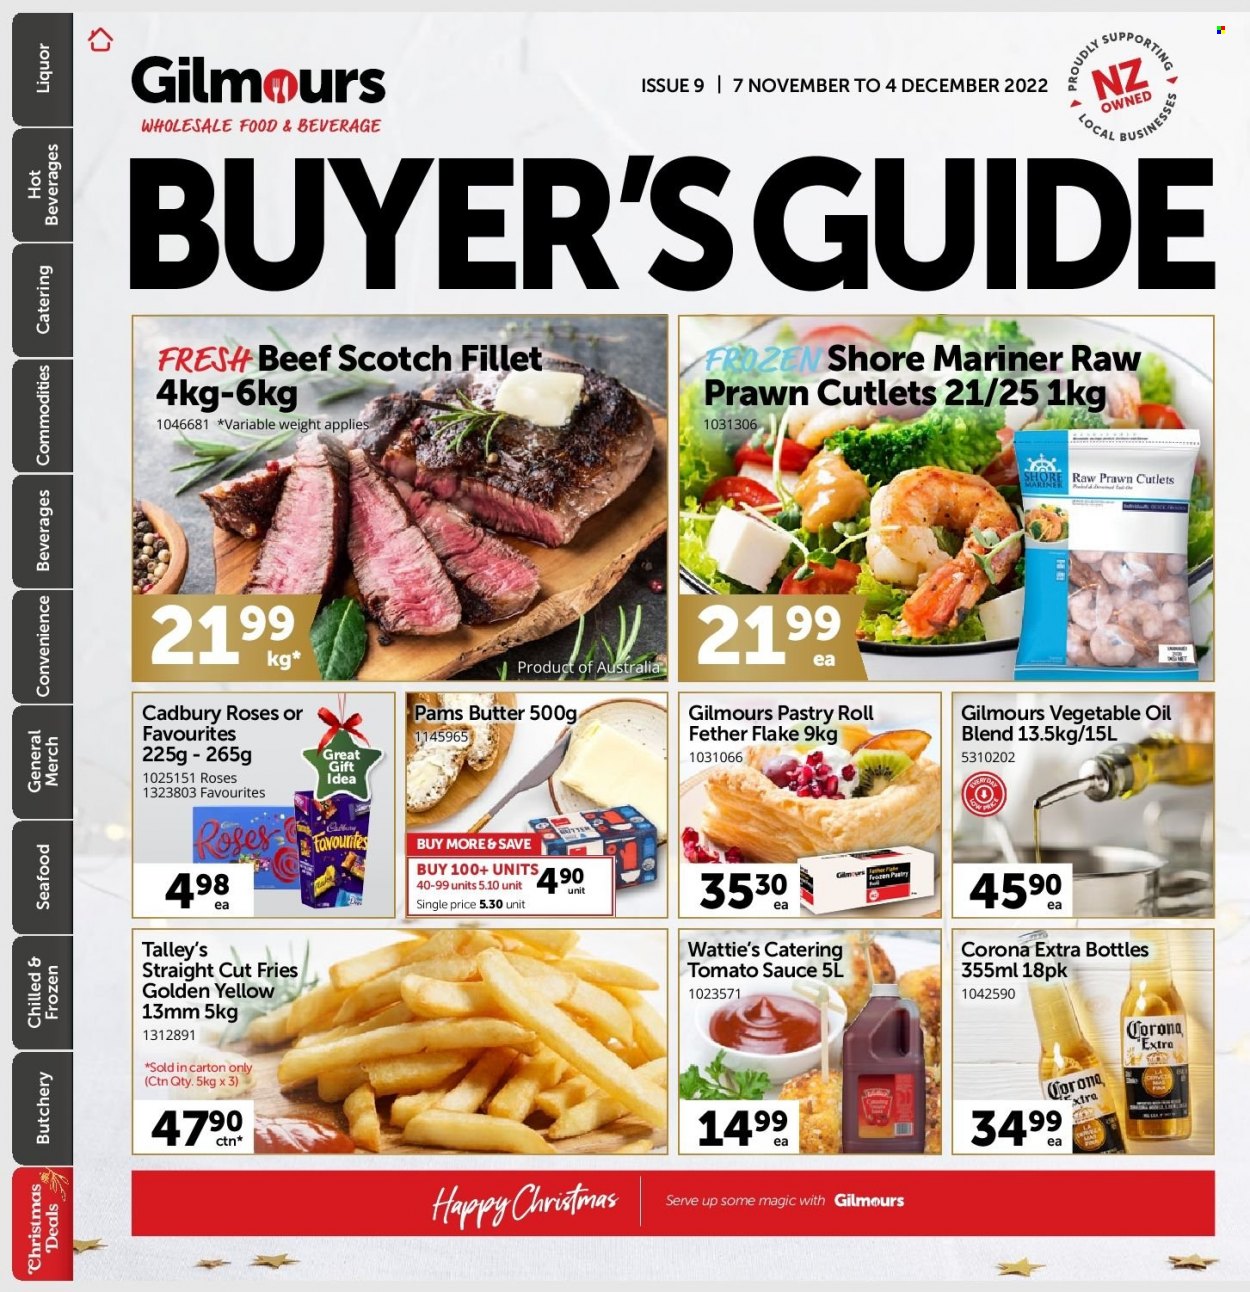 thumbnail - Gilmours mailer - 07.11.2022 - 04.12.2022 - Sales products - seafood, prawns, Shore Mariner, sauce, Wattie's, butter, potato fries, Cadbury, Cadbury Roses, tomato sauce, vegetable oil, oil, liquor, beer, Corona Extra, XTRA. Page 1.